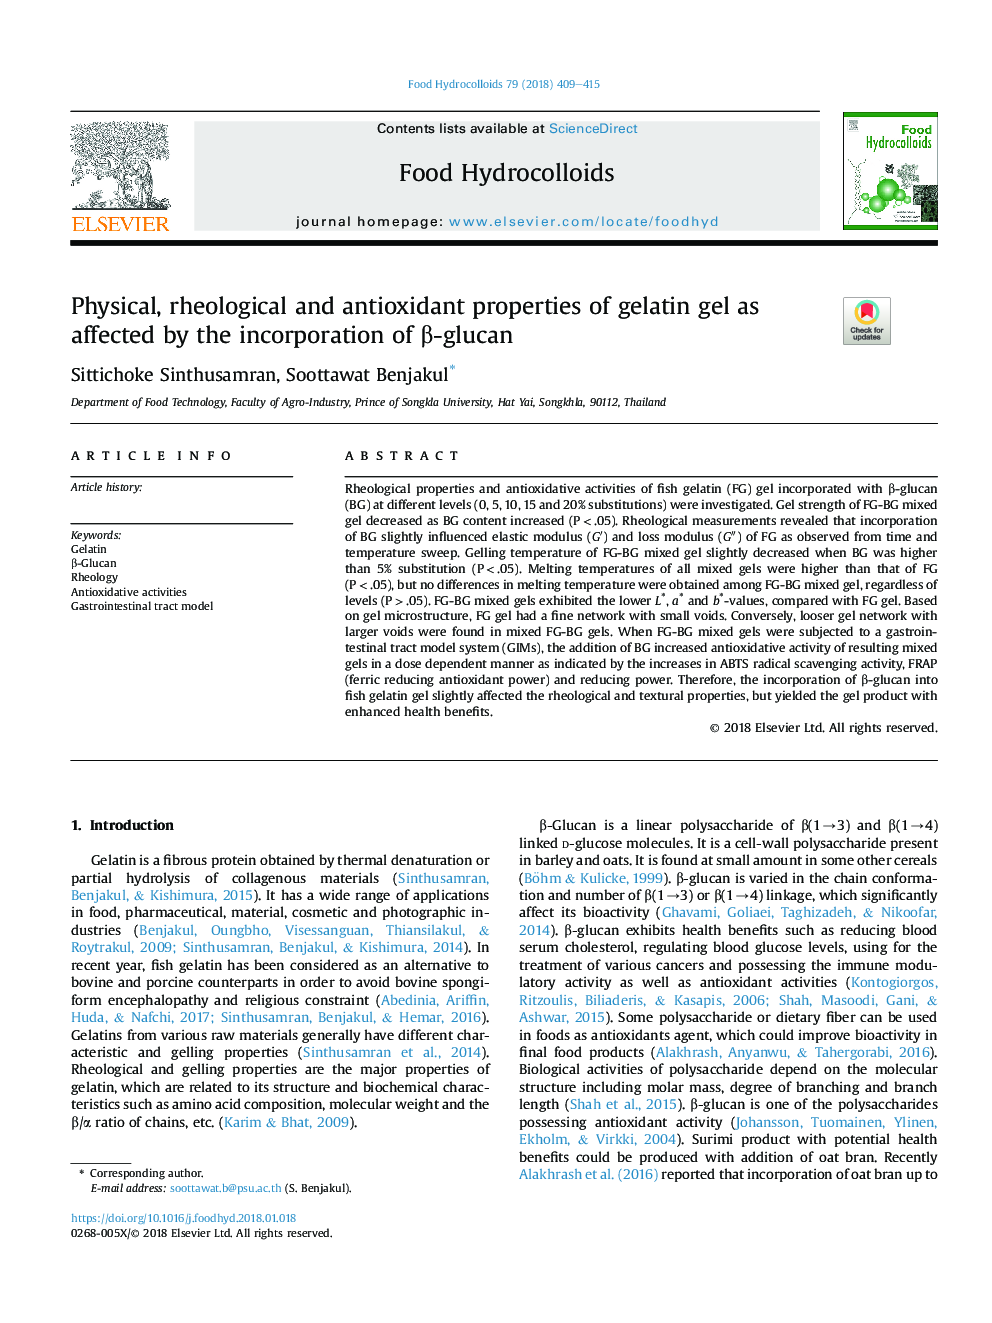 Physical, rheological and antioxidant properties of gelatin gel as affected by the incorporation of Î²-glucan